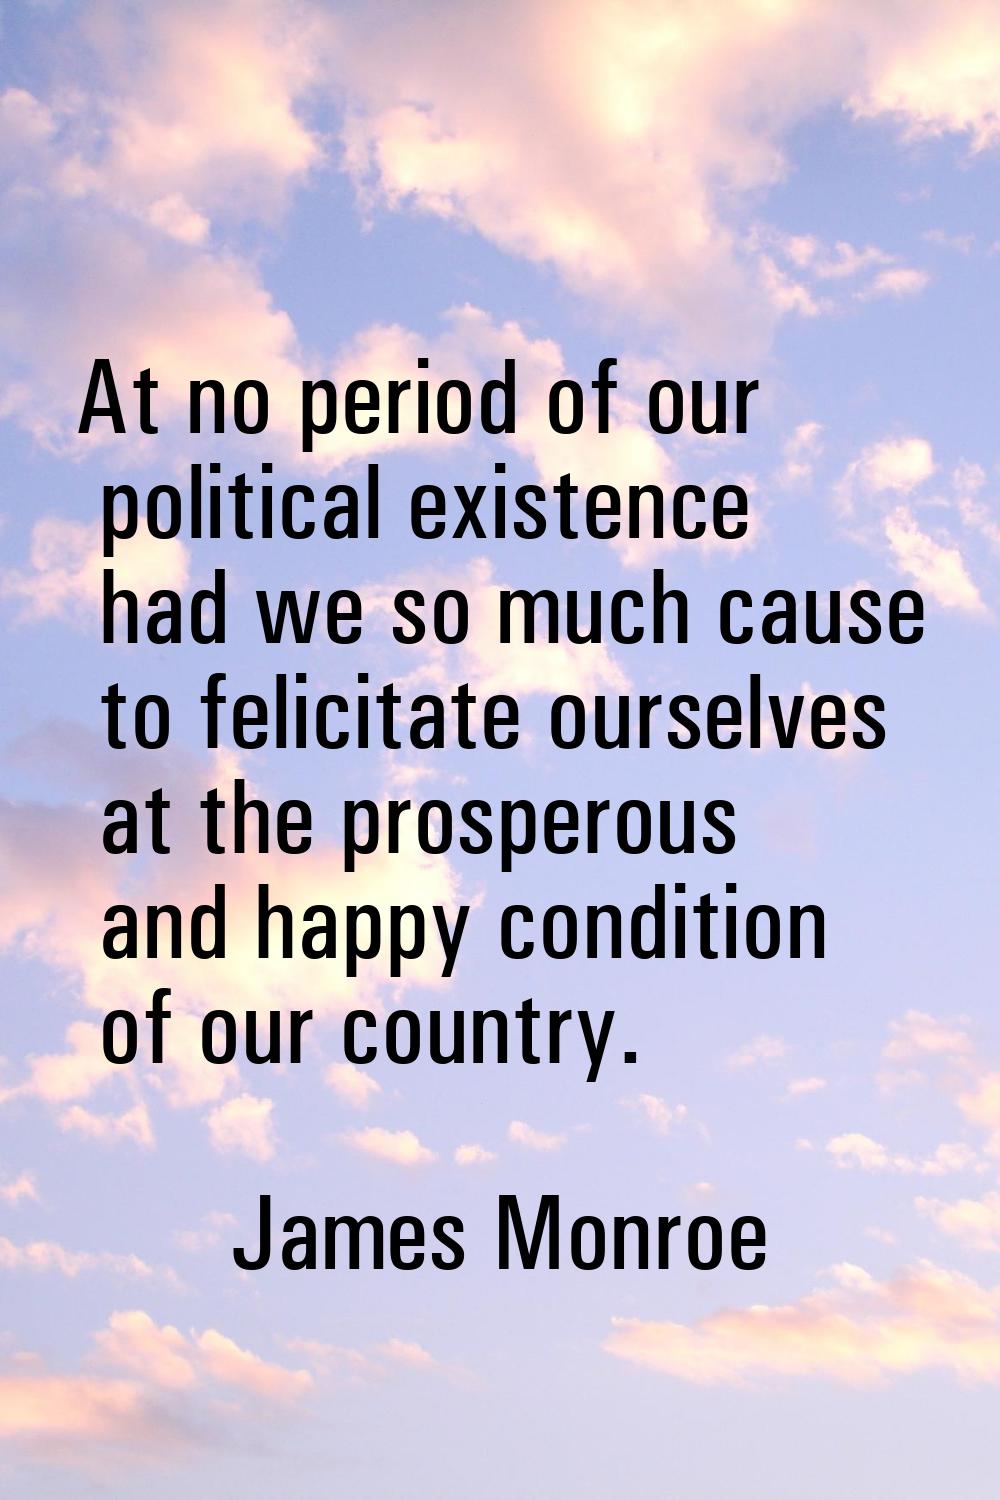 At no period of our political existence had we so much cause to felicitate ourselves at the prosper